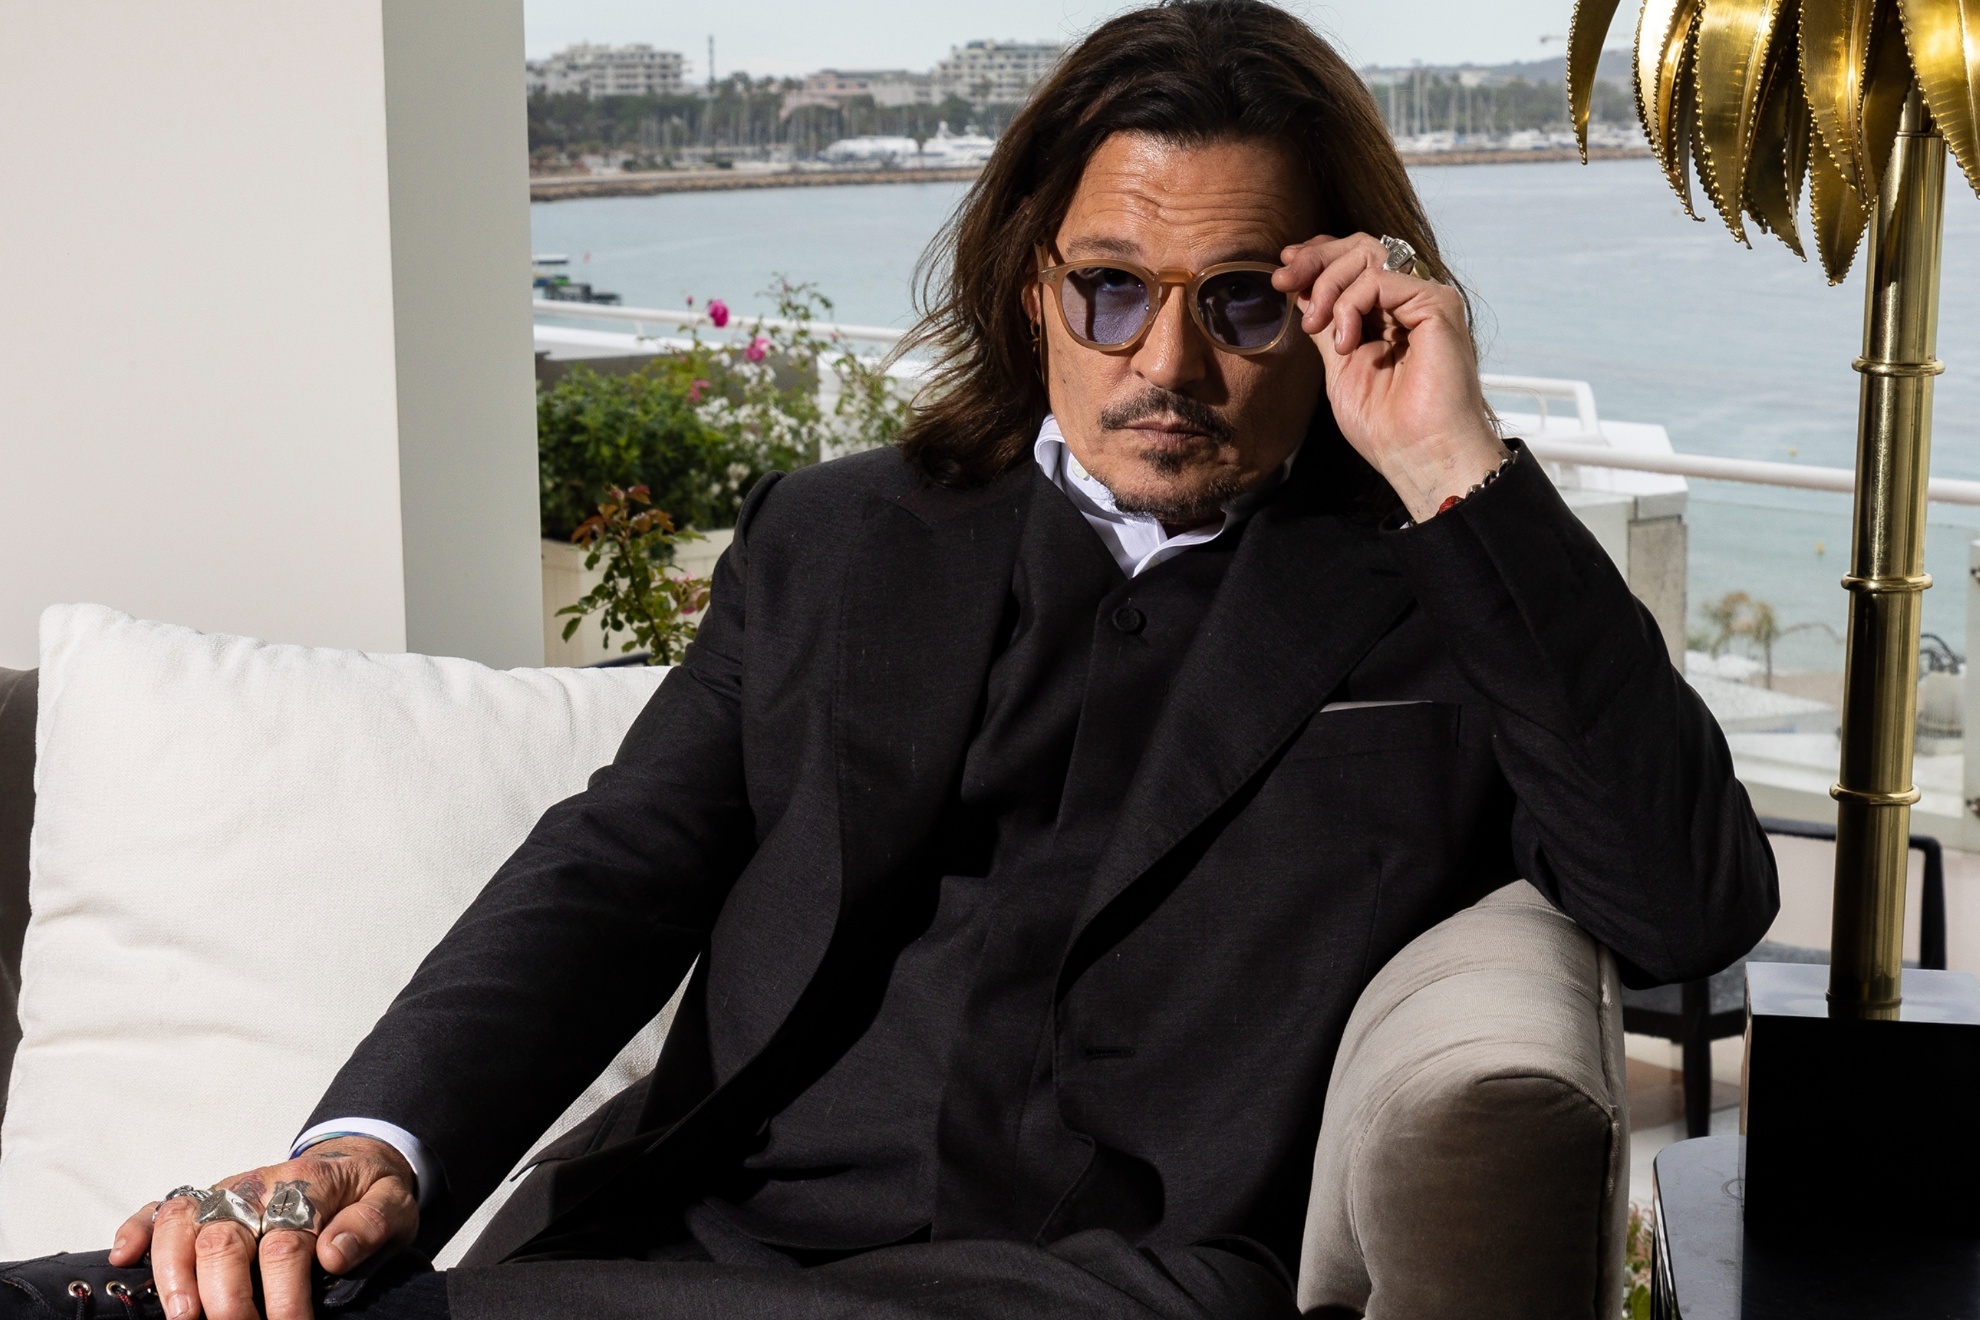 There's no chance for Johnny Depp to be in another 'Pirates of the Caribbean' movie.